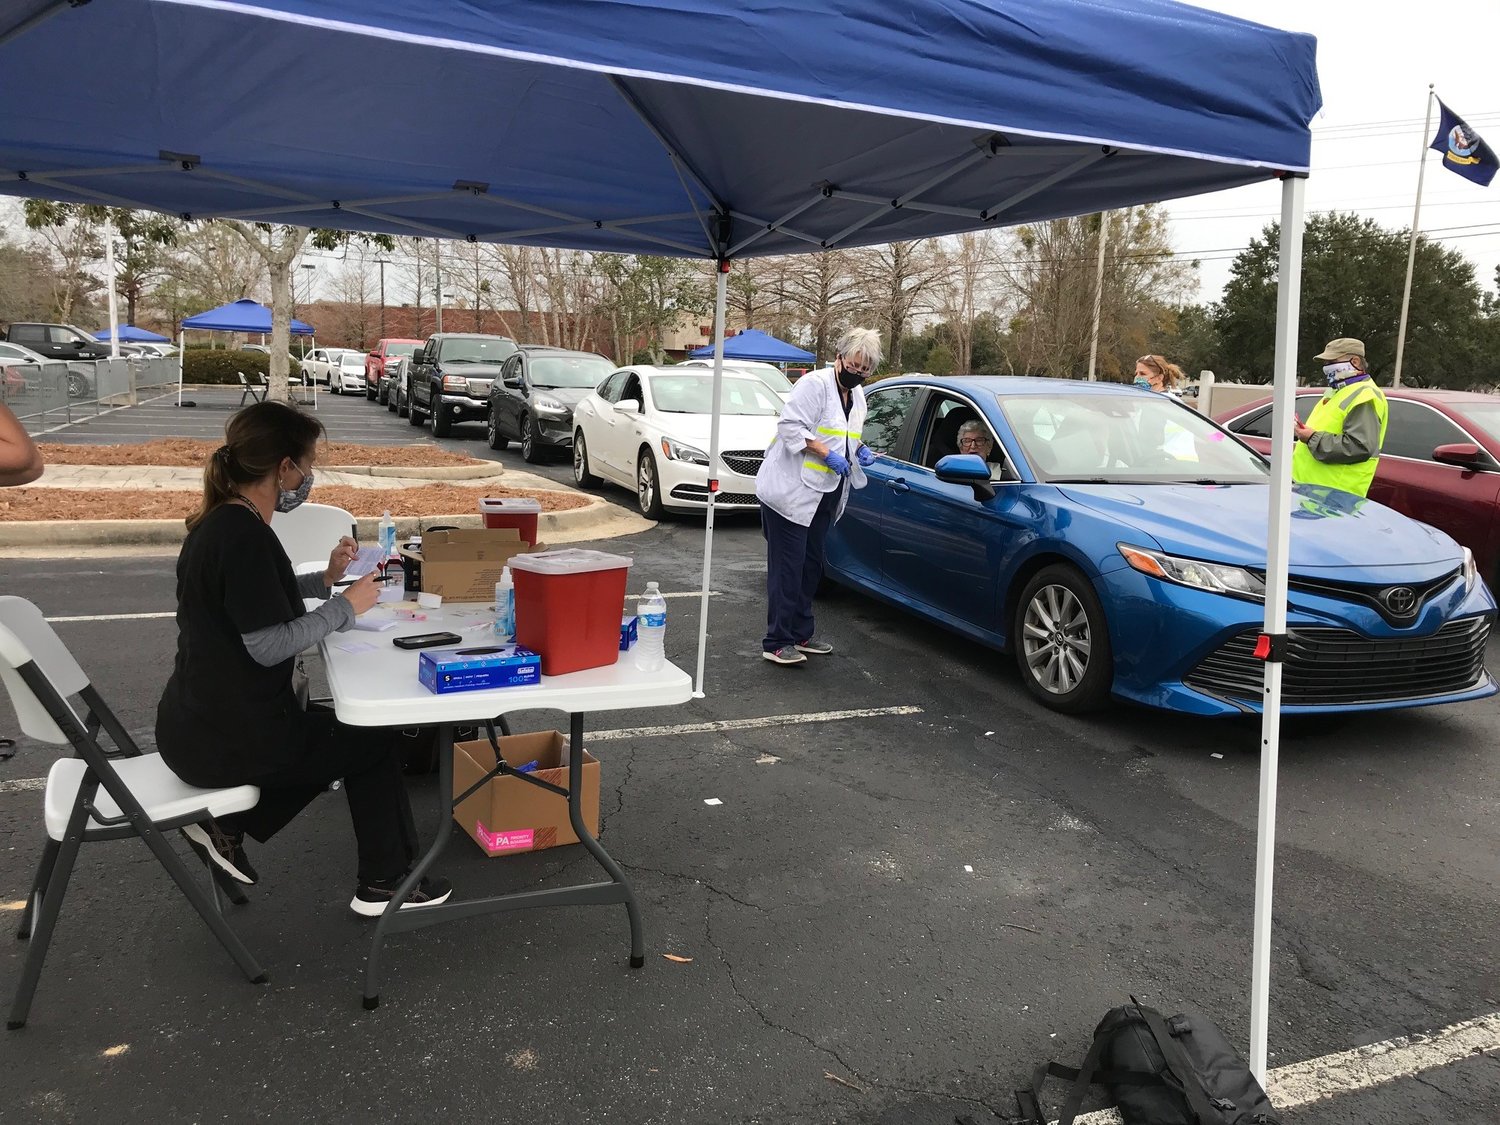 Baldwin County Department of Public Health and Emergency Management Agency officials conduct a vaccine clinic in Daphne in January 2021. The Baldwin County Commission voted in July to lift the COVID-19 state of emergency in place since March 2020.